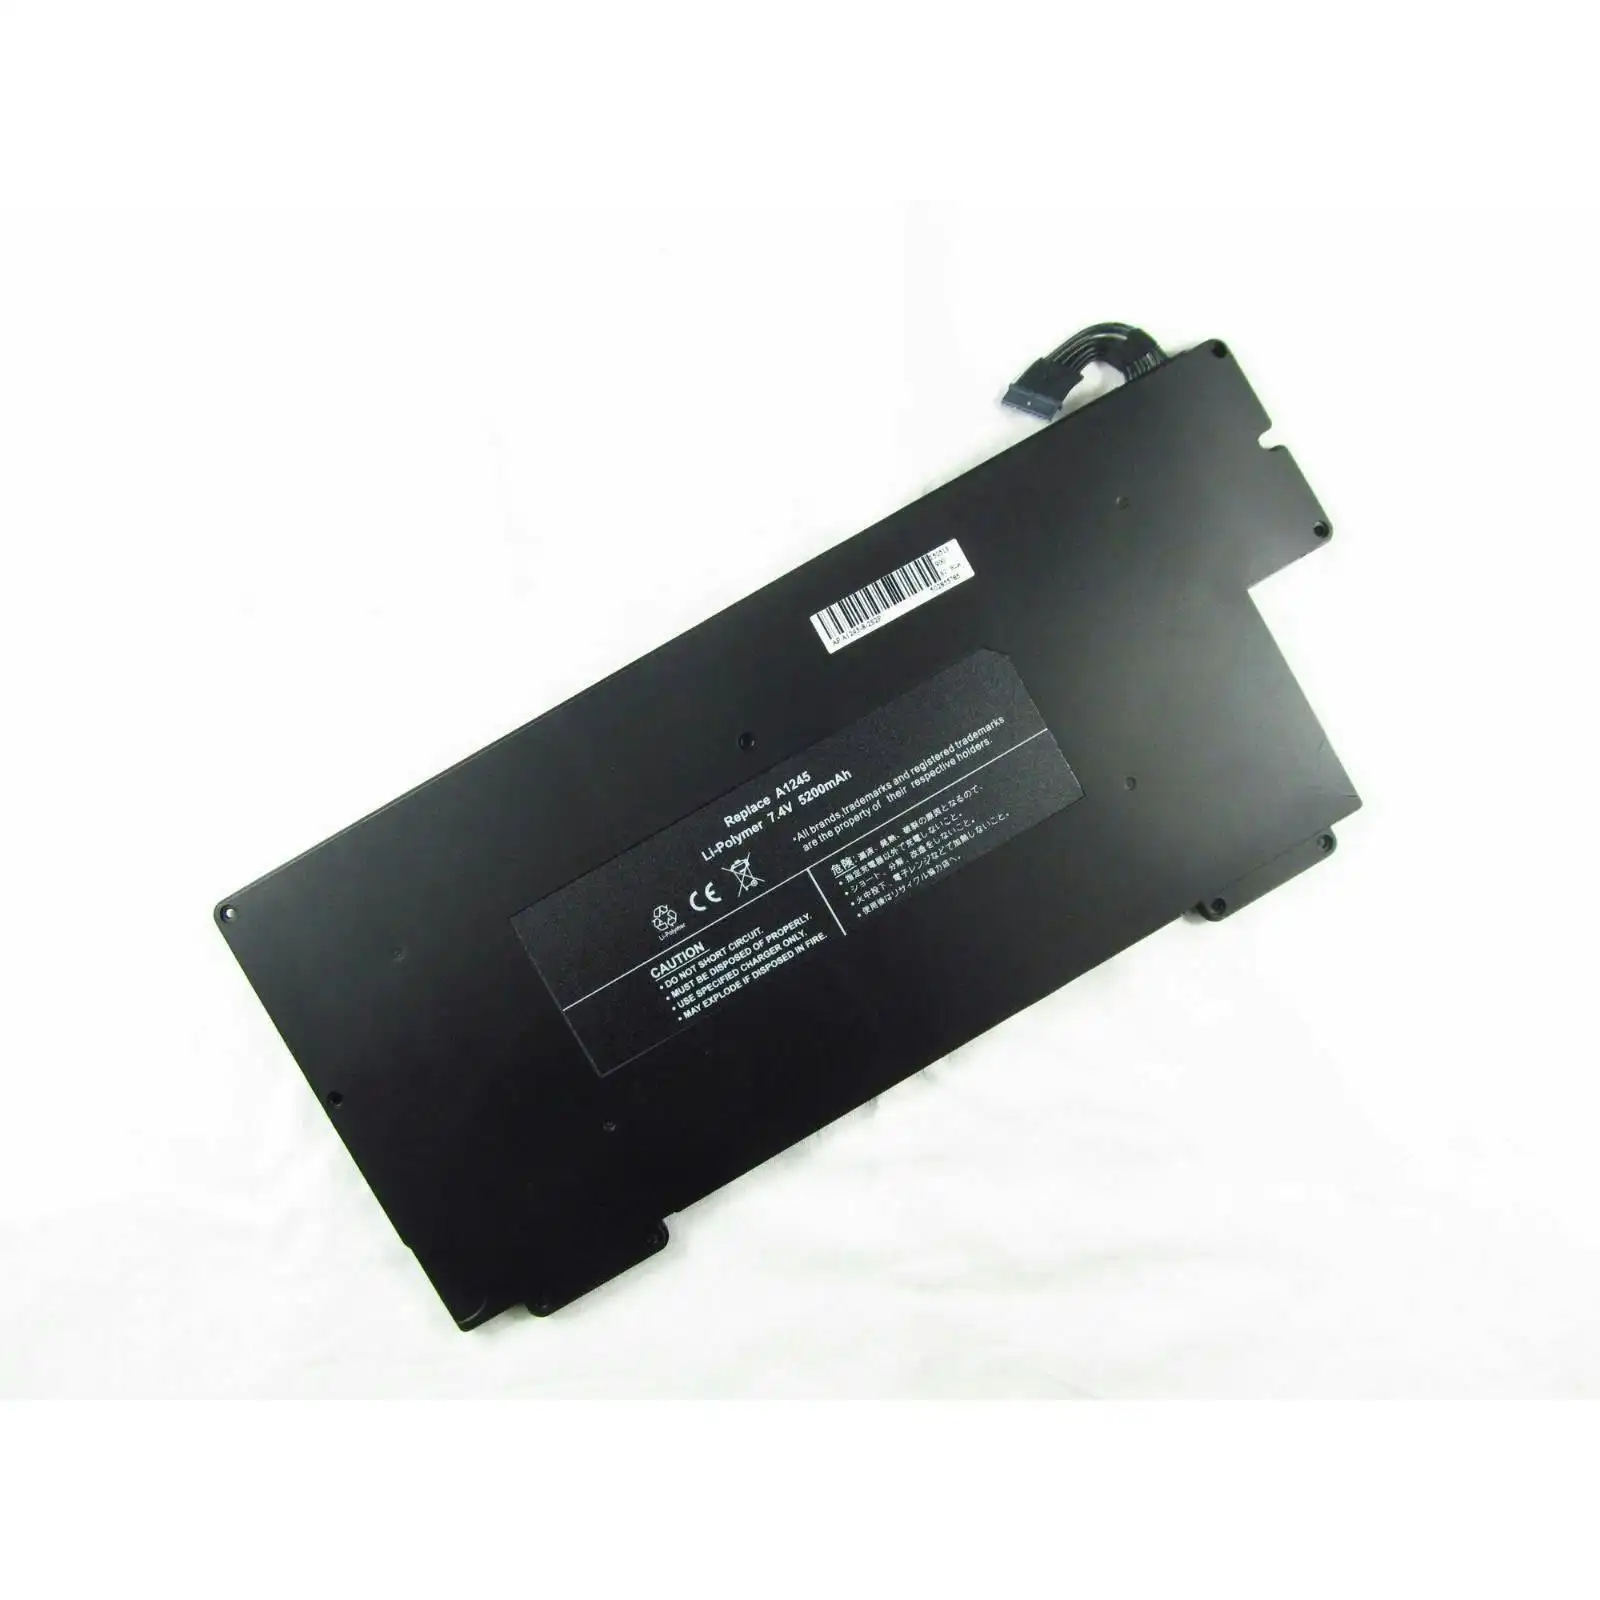 Apple A1245 Battery Replacement | MacBook Air 13inch A1237 A1304 A1245 Z0FS MB003 MC233